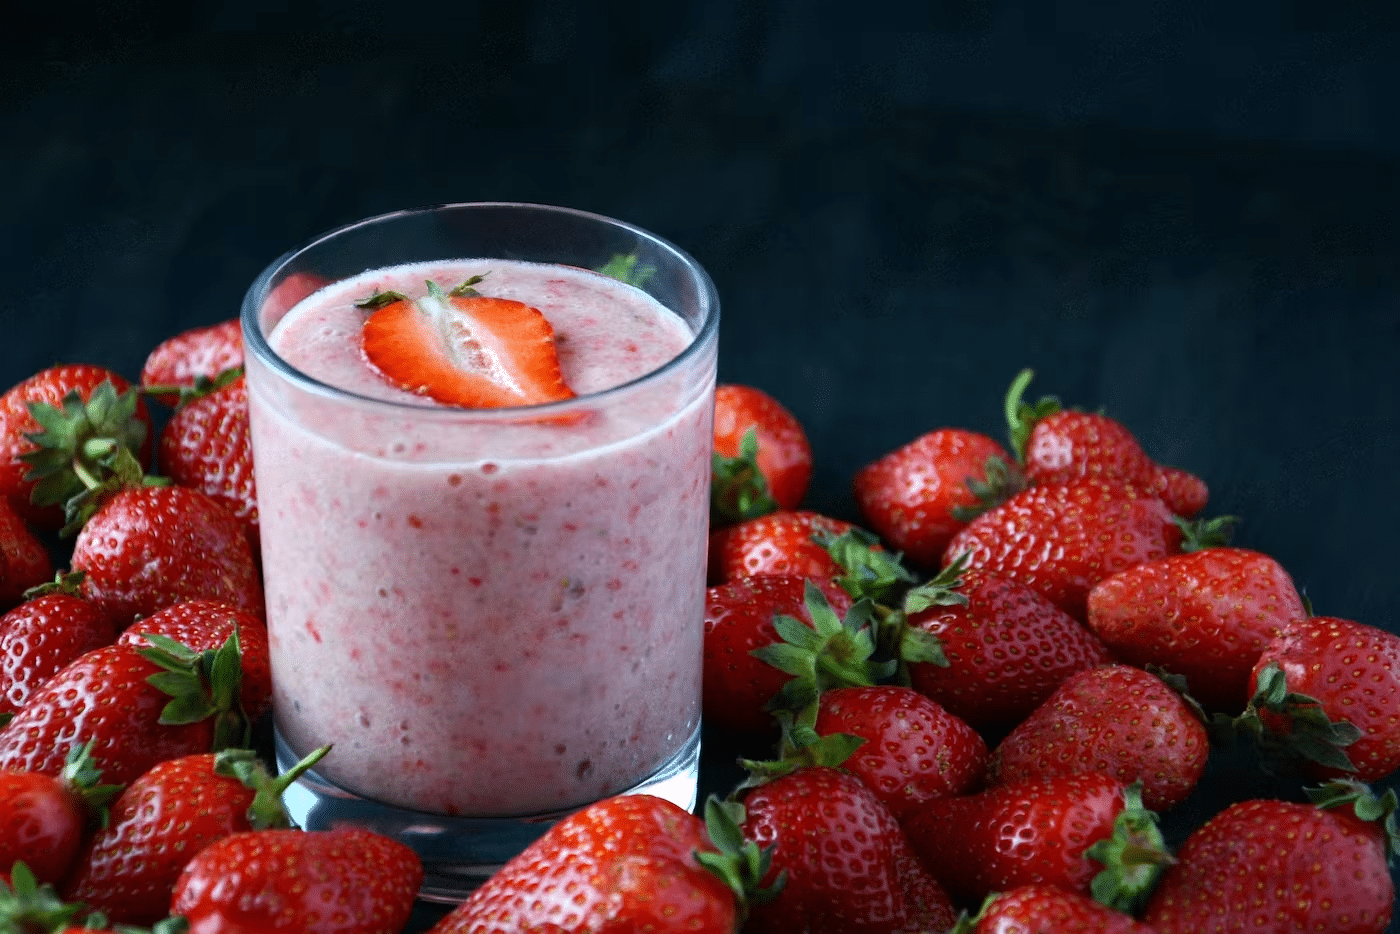 Lower-Carb Strawberry Smoothie